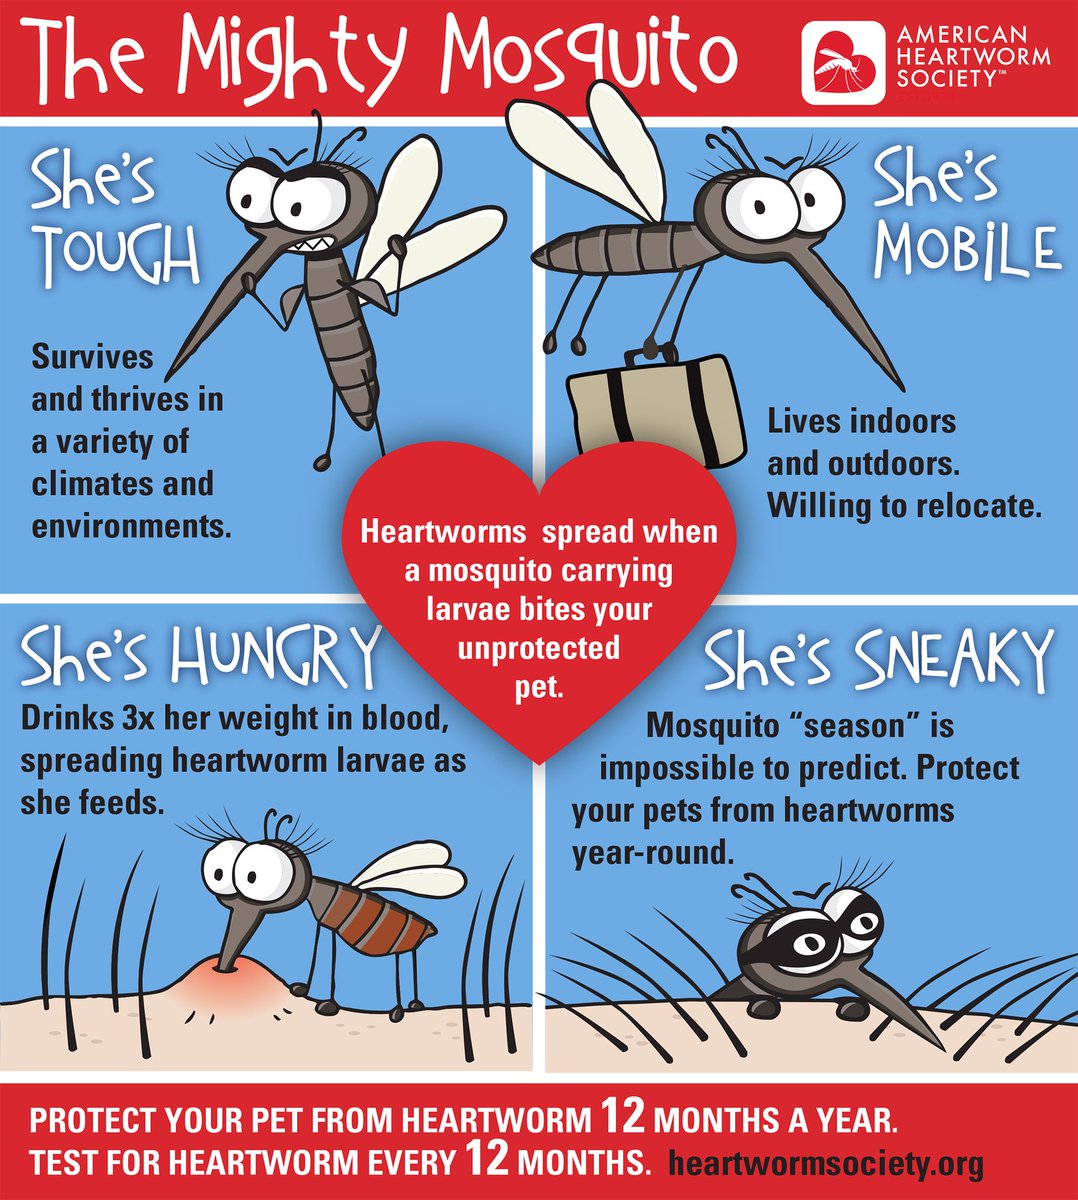 Mosquitoes pose a big threat to your pet's health. April is Heartworm Awareness Month #heartwormawareness @AHS_Think12